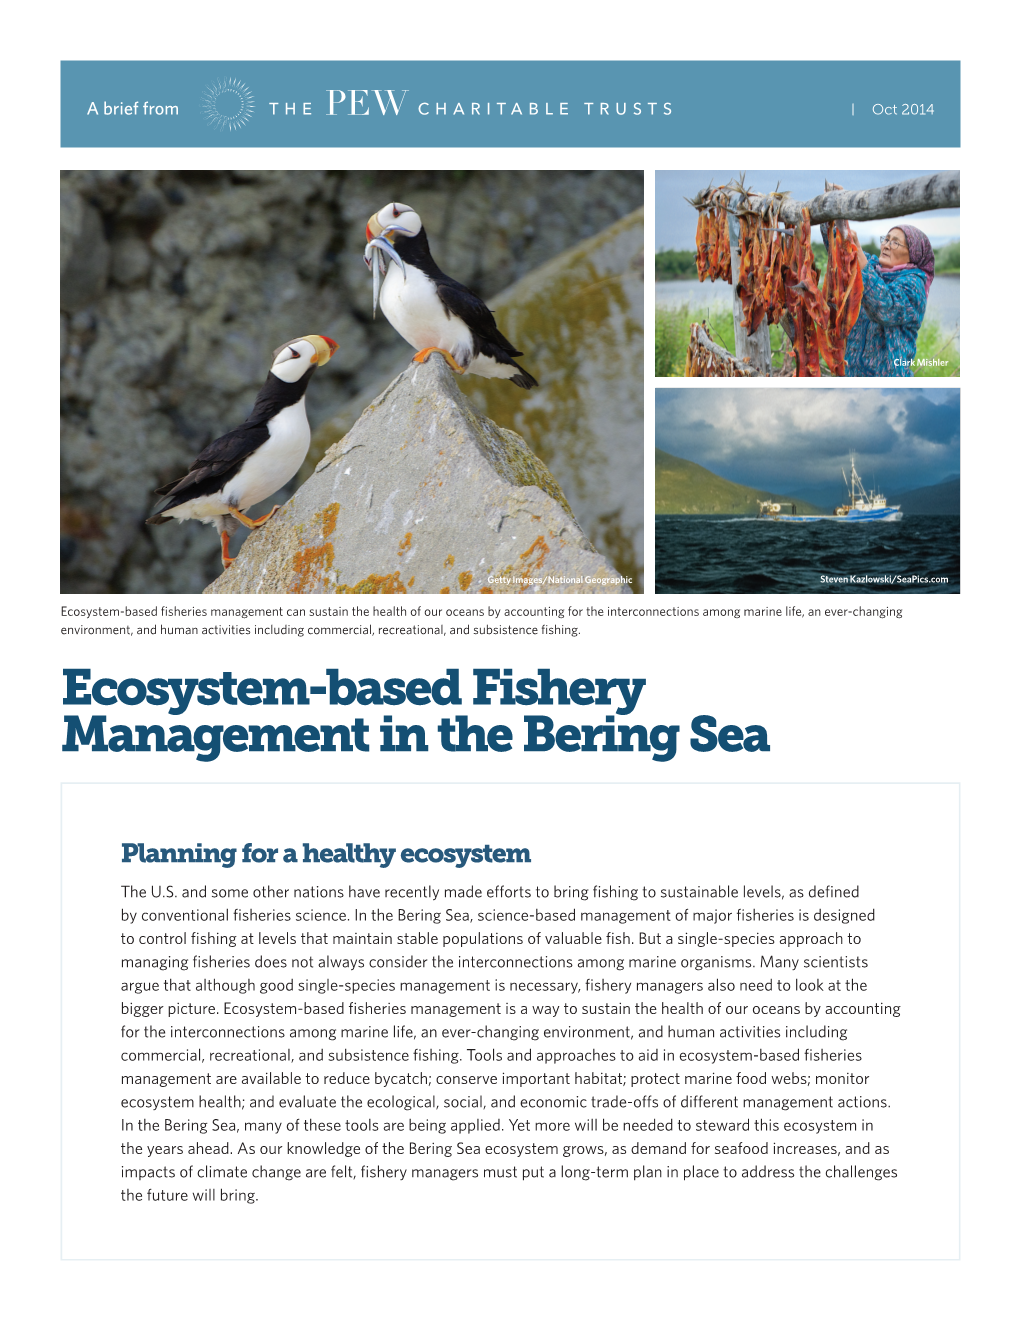 Ecosystem-Based Fishery Management in the Bering Sea